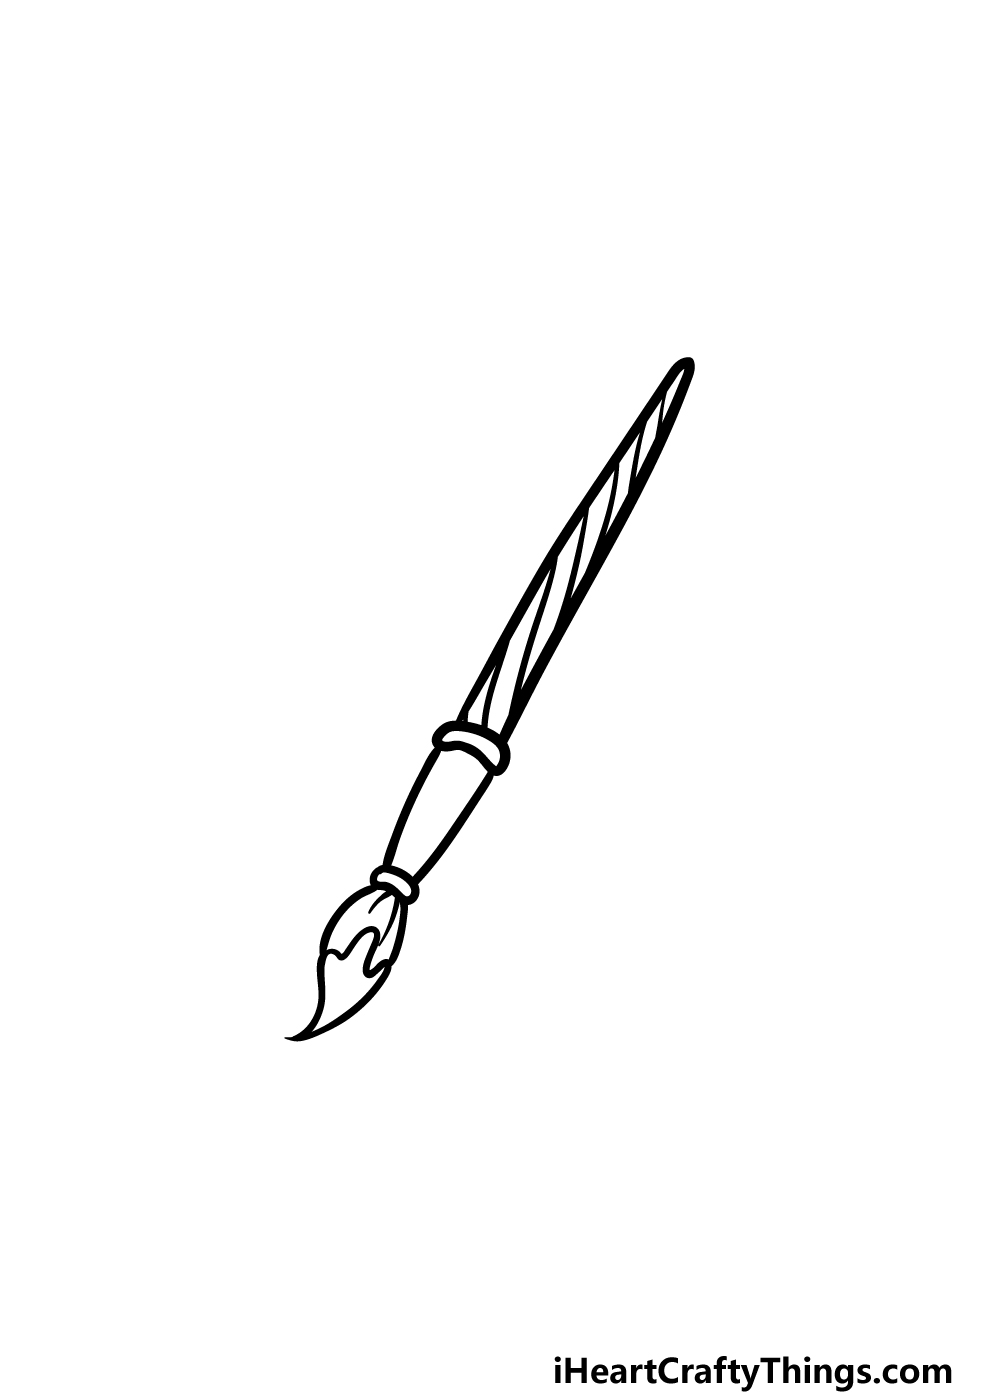 Paintbrush Drawing - How To Draw A Paintbrush Step By Step